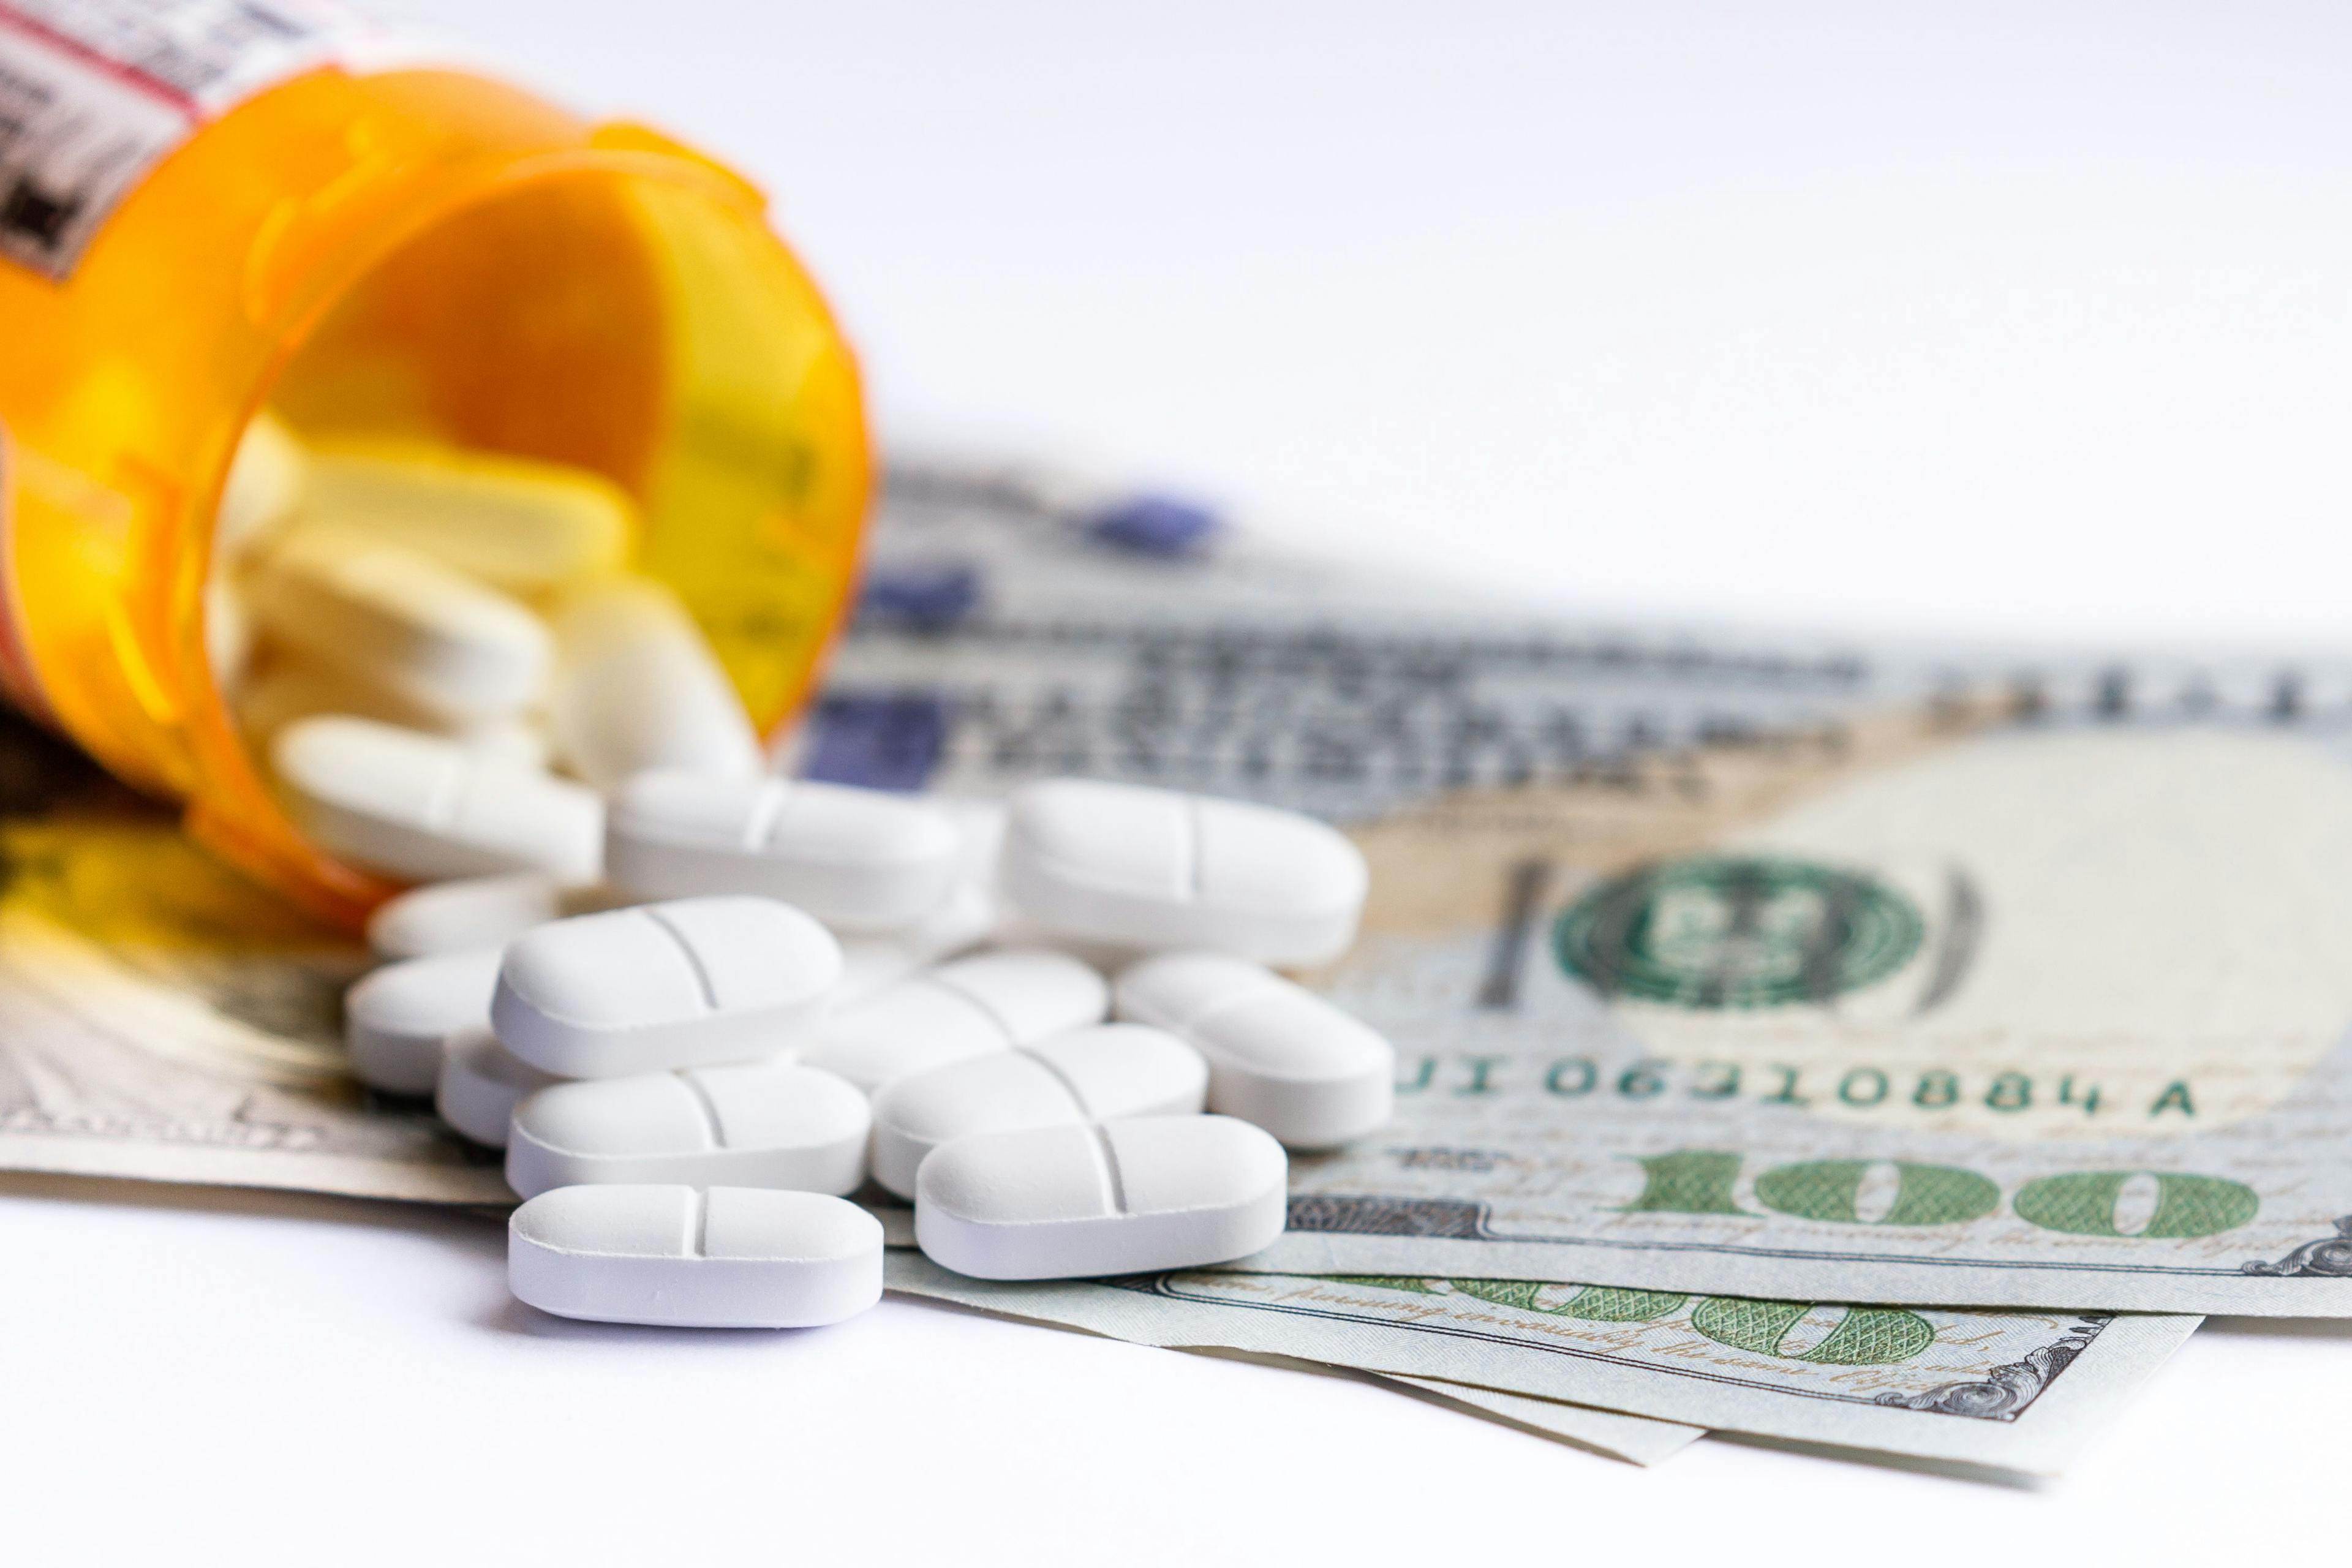 Employers cite higher healthcare costs, drug prices, and managing chronic illnesses among their chief concerns for 2024, according to The Business Group on Health. (Image credit: ©wollertz - stock.adobe.com)